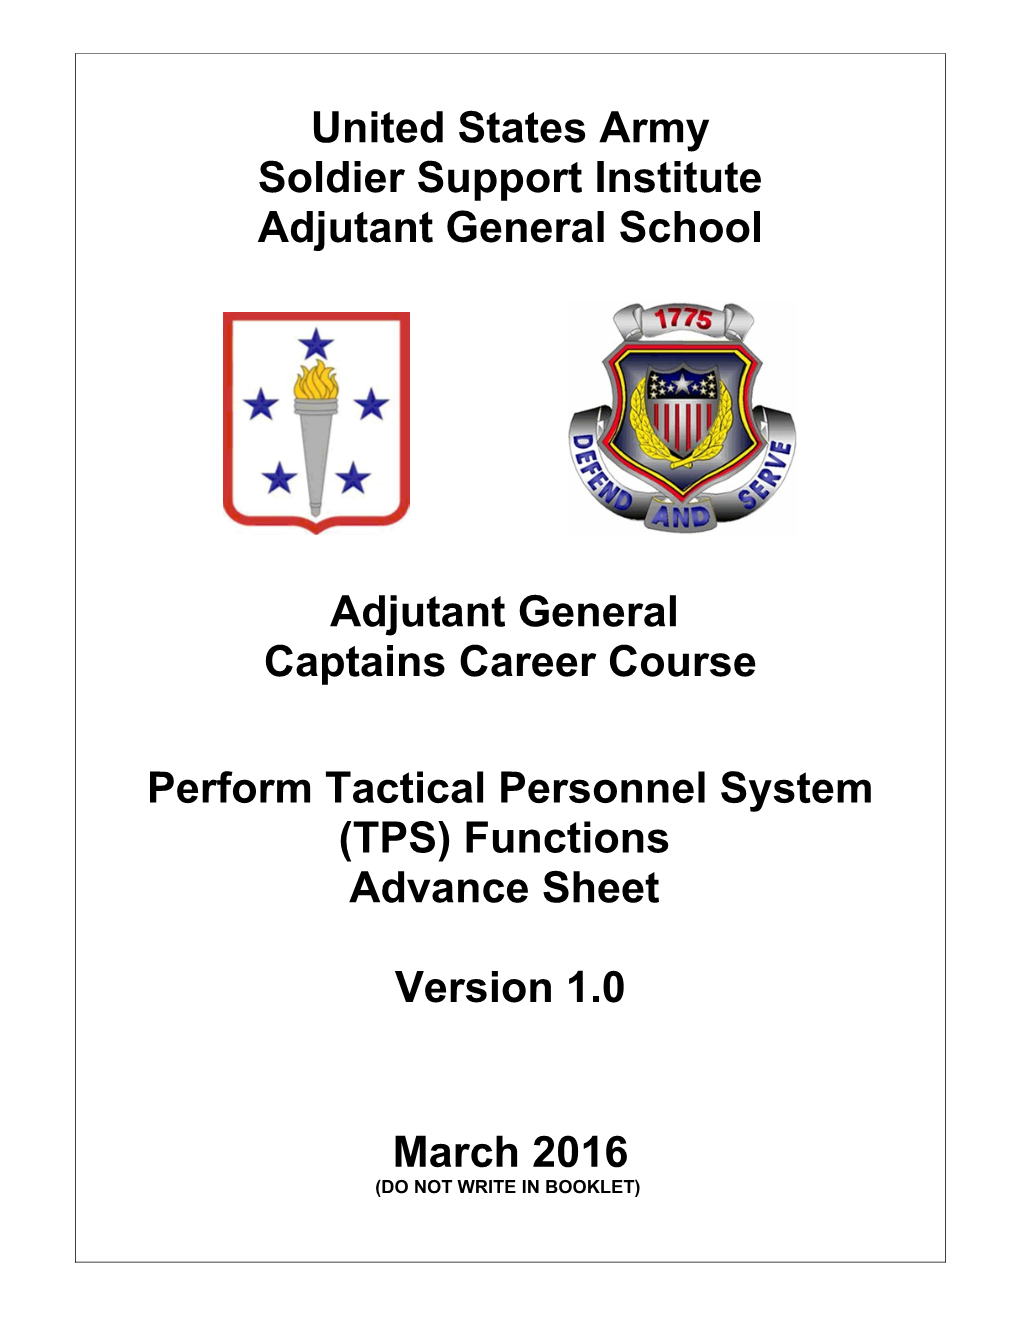 Perform Tactical Personnel System (TPS) Functions